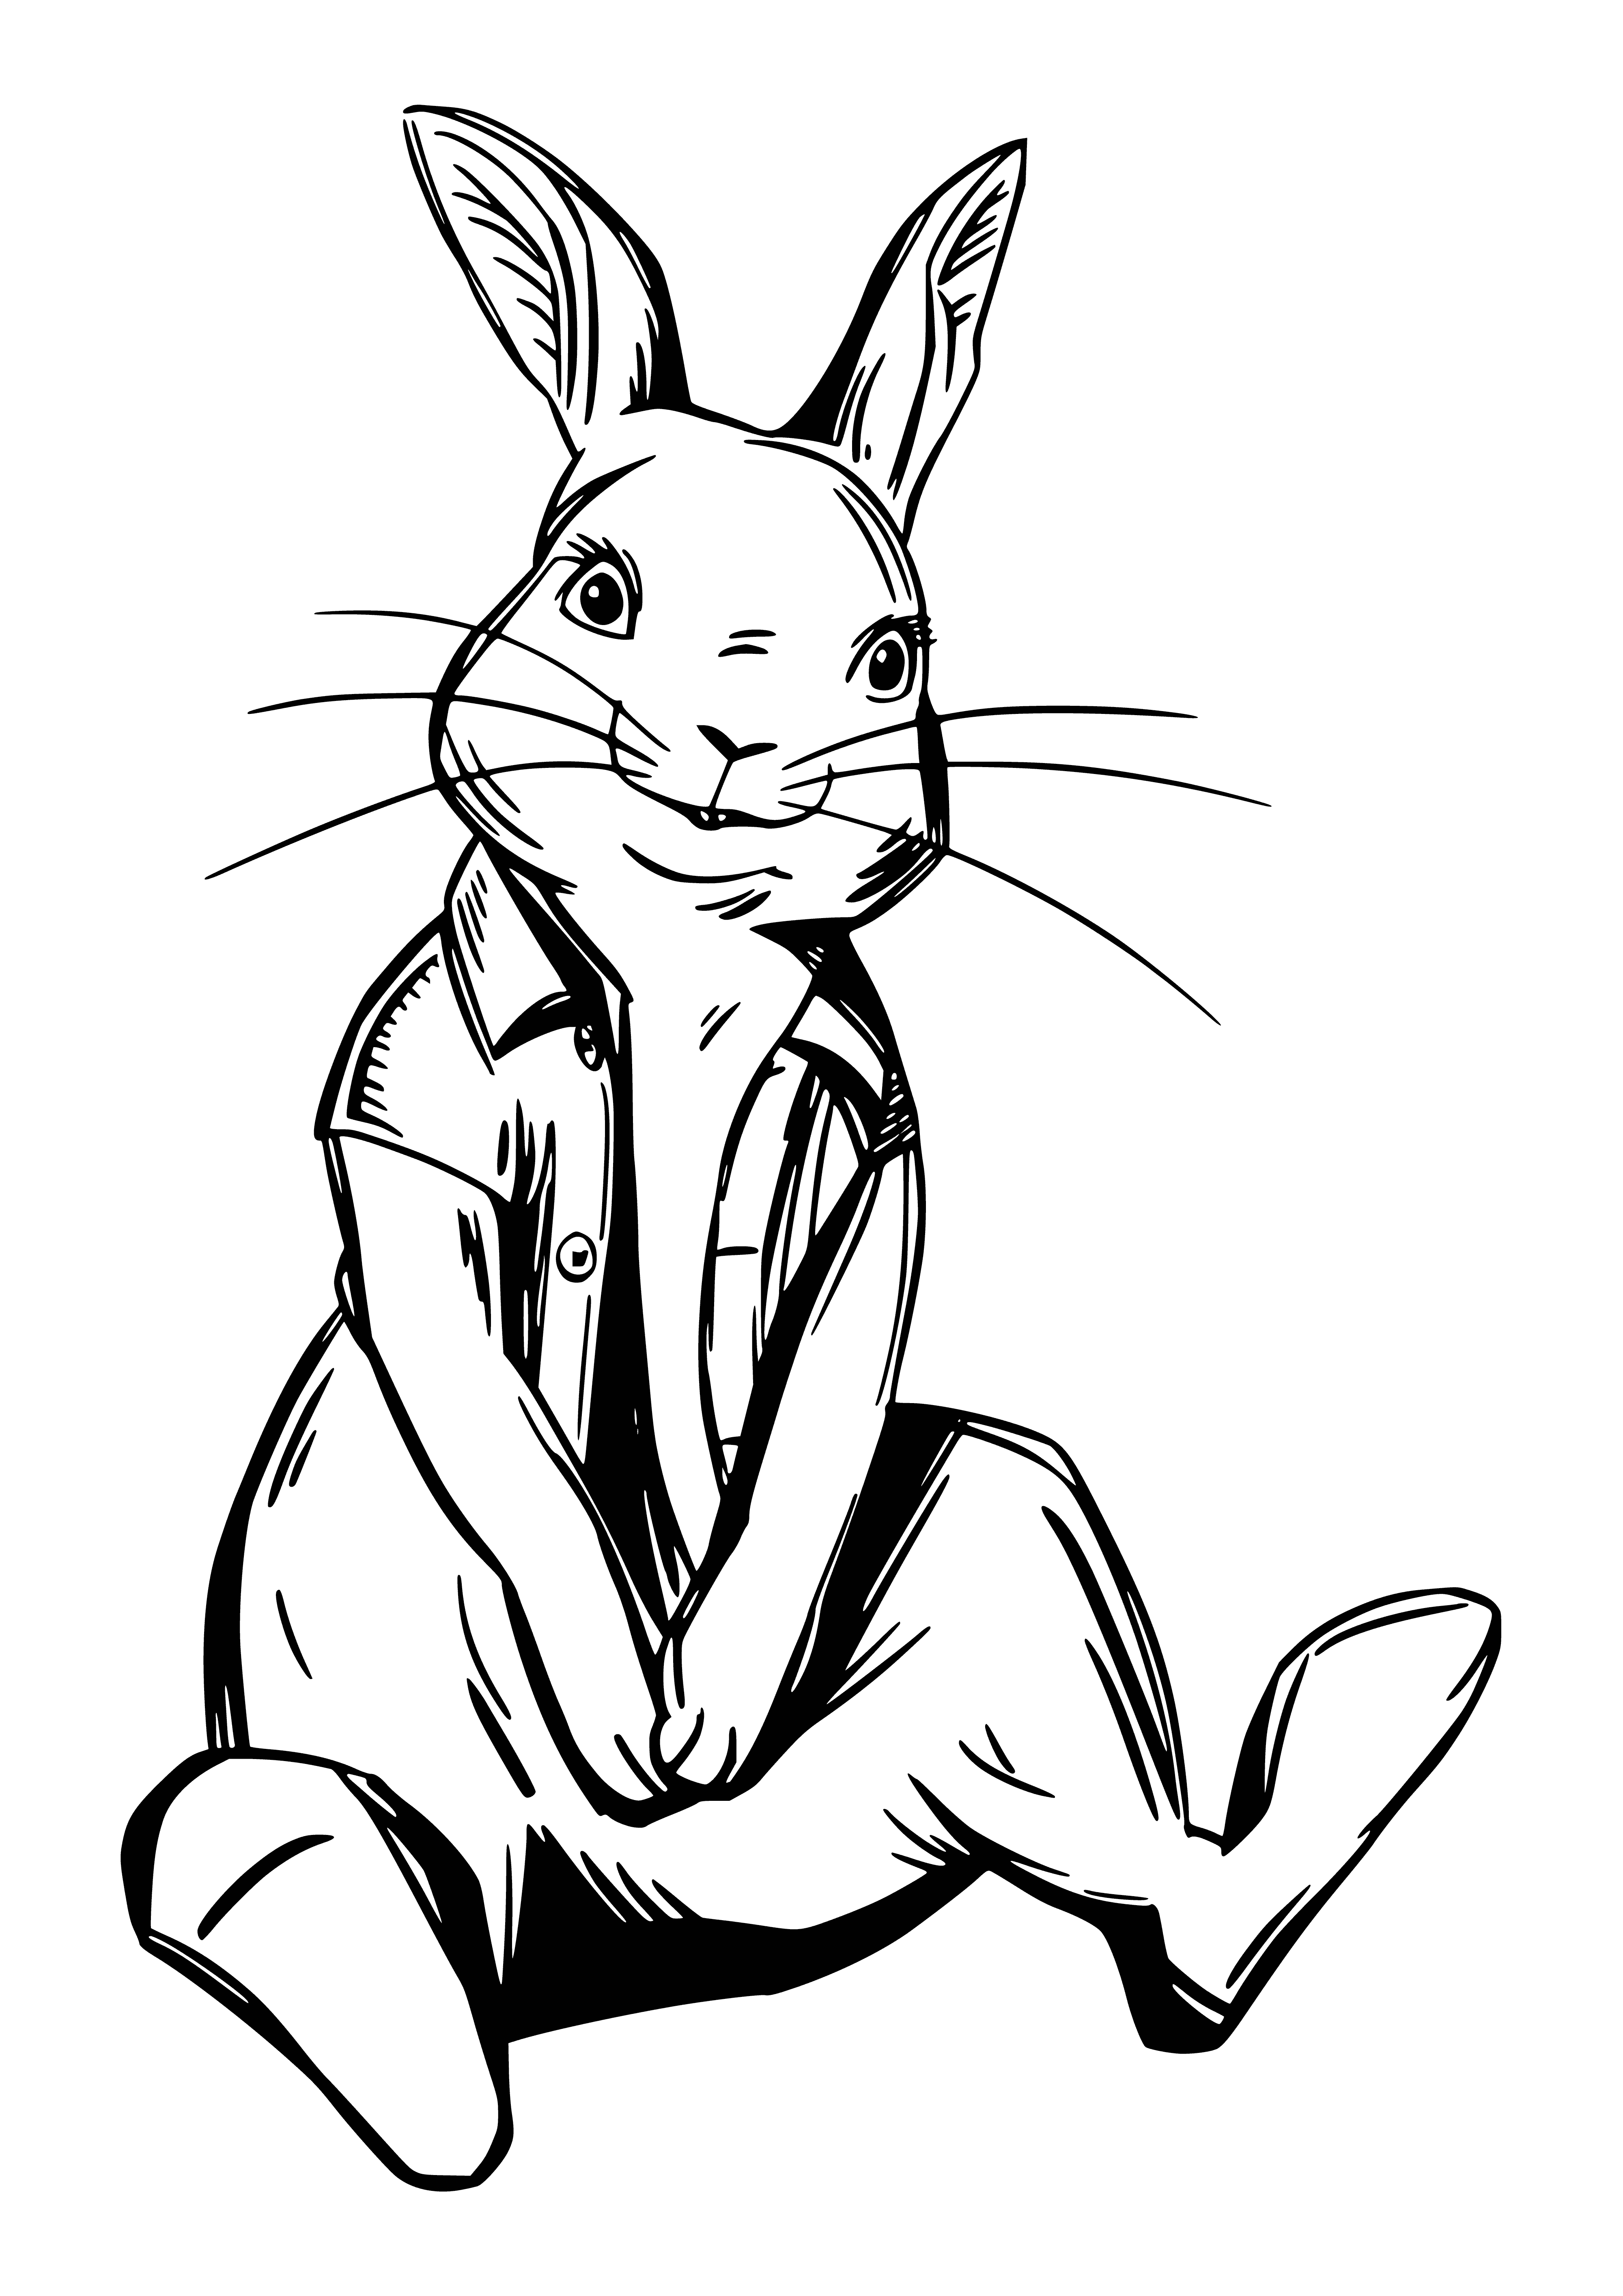 coloring page: This small gray bunny is cosily reading a book while wearing a blue jacket and red neck scarf on a mushroom in a green forest.